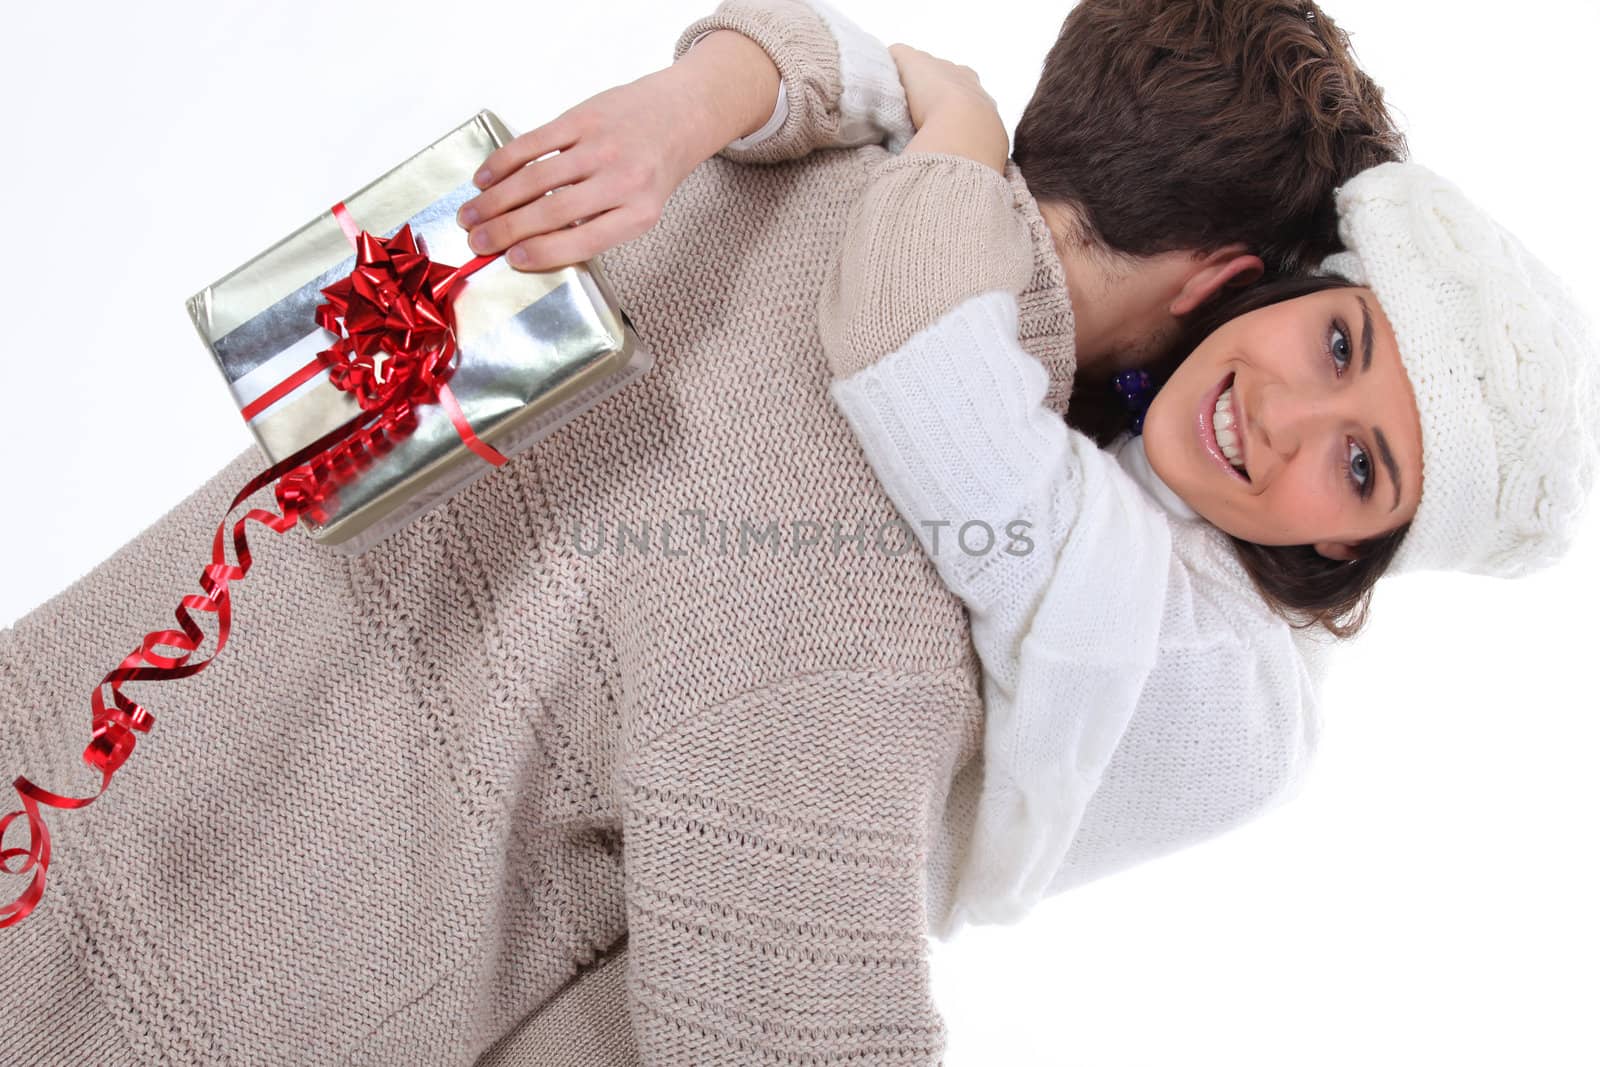 Woman happy with her surprise gift by phovoir